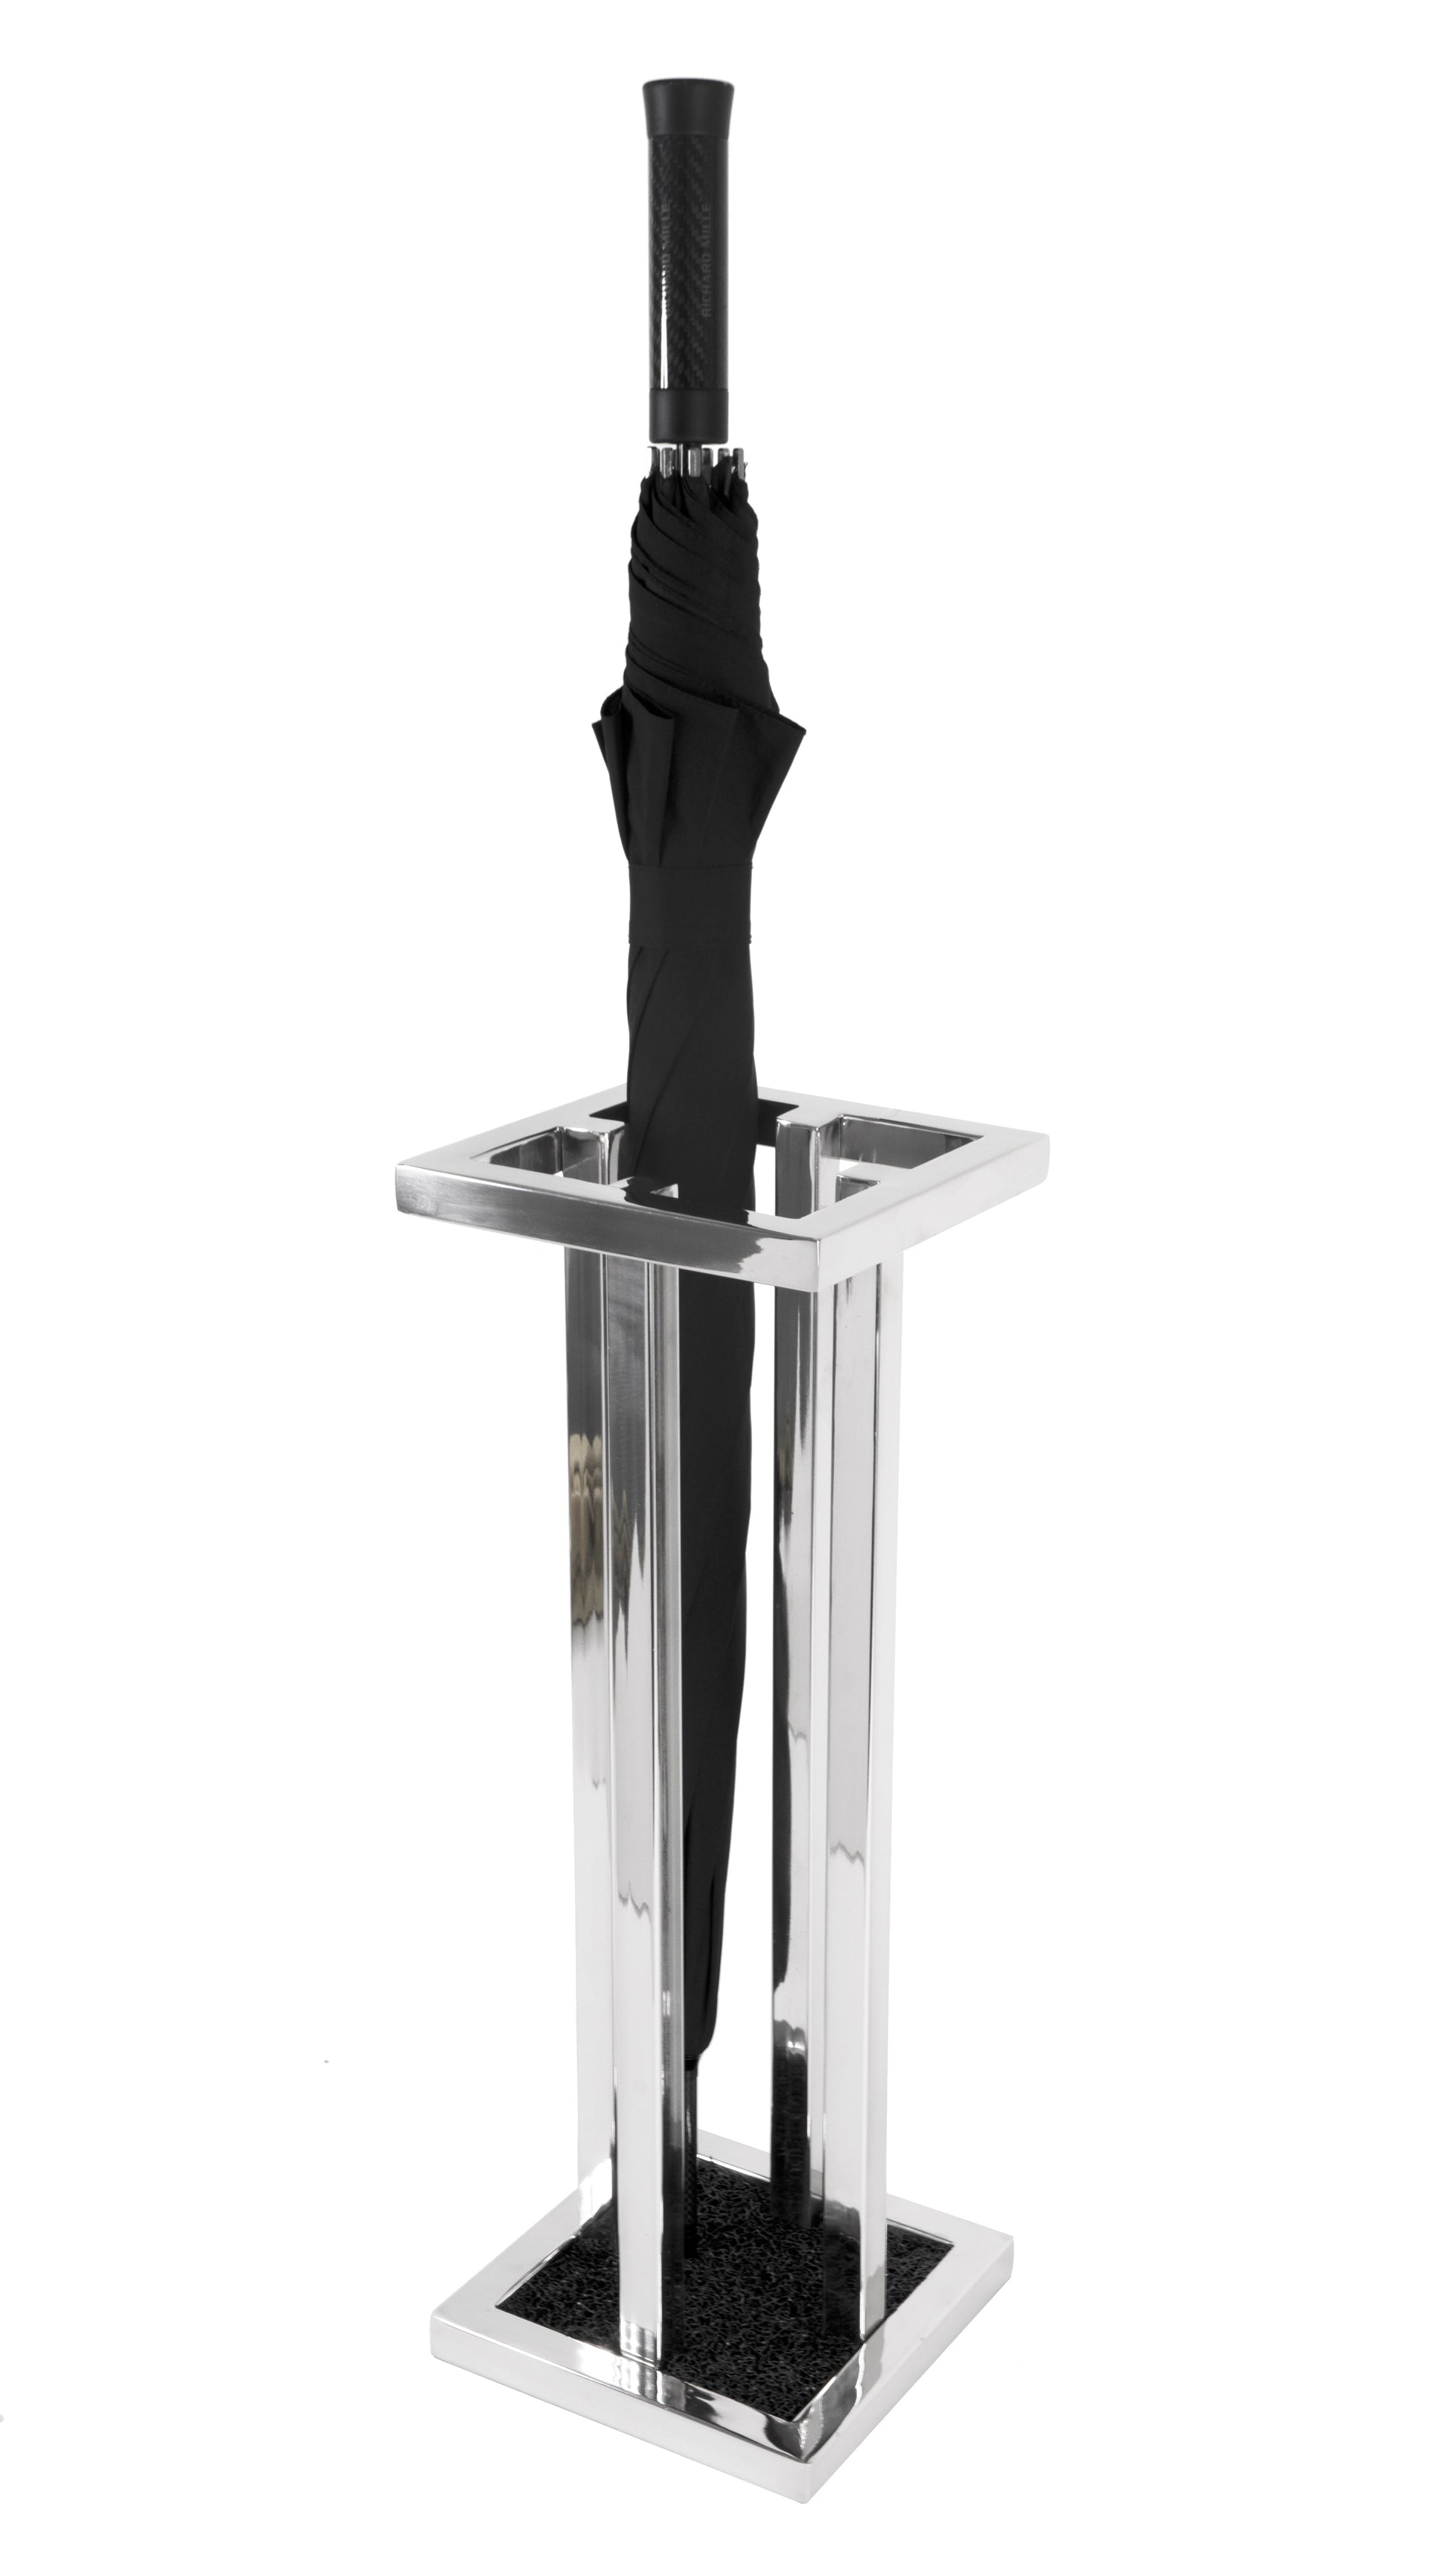 Stainless Steel Square Umbrella Holder - Expo Home Decor